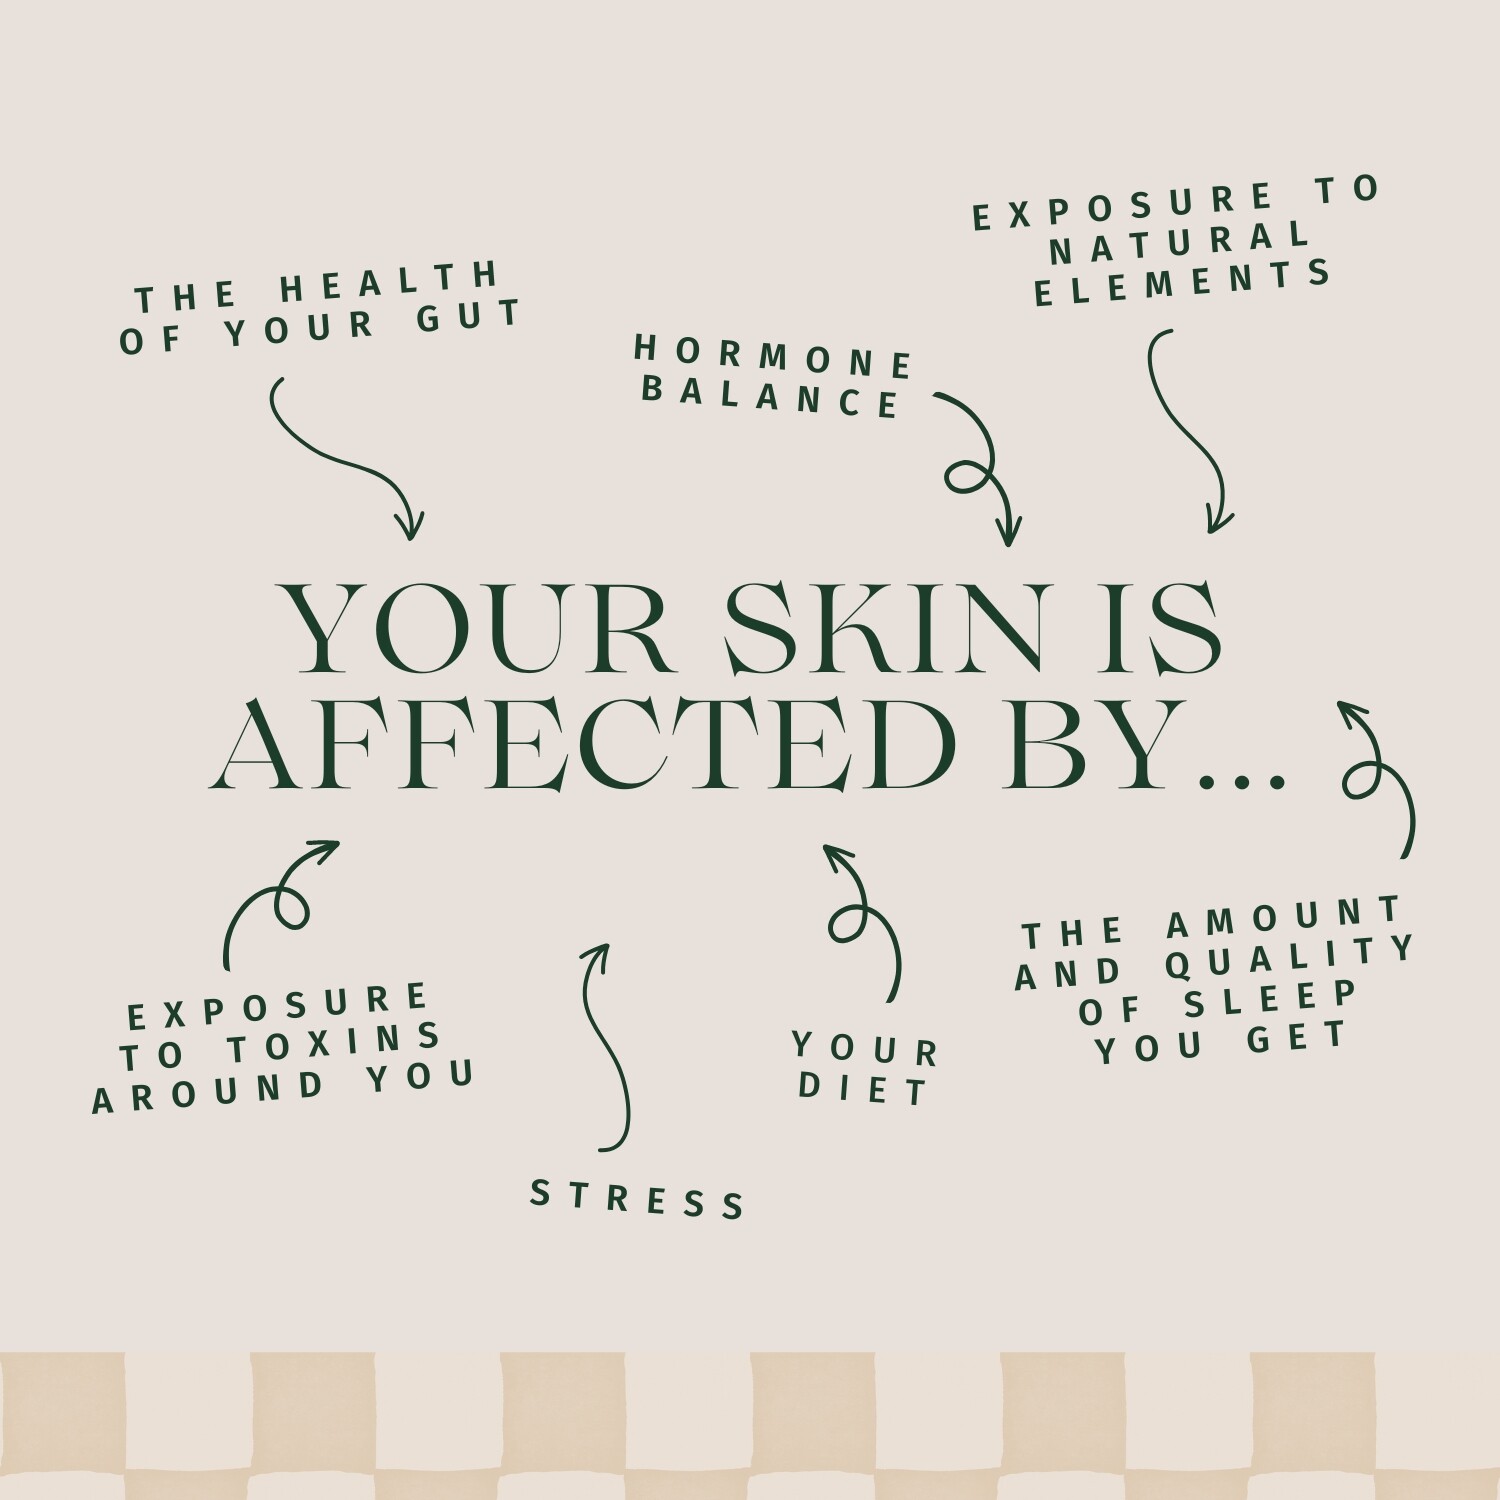 The Connection Between Your Skin and Your Wellness!